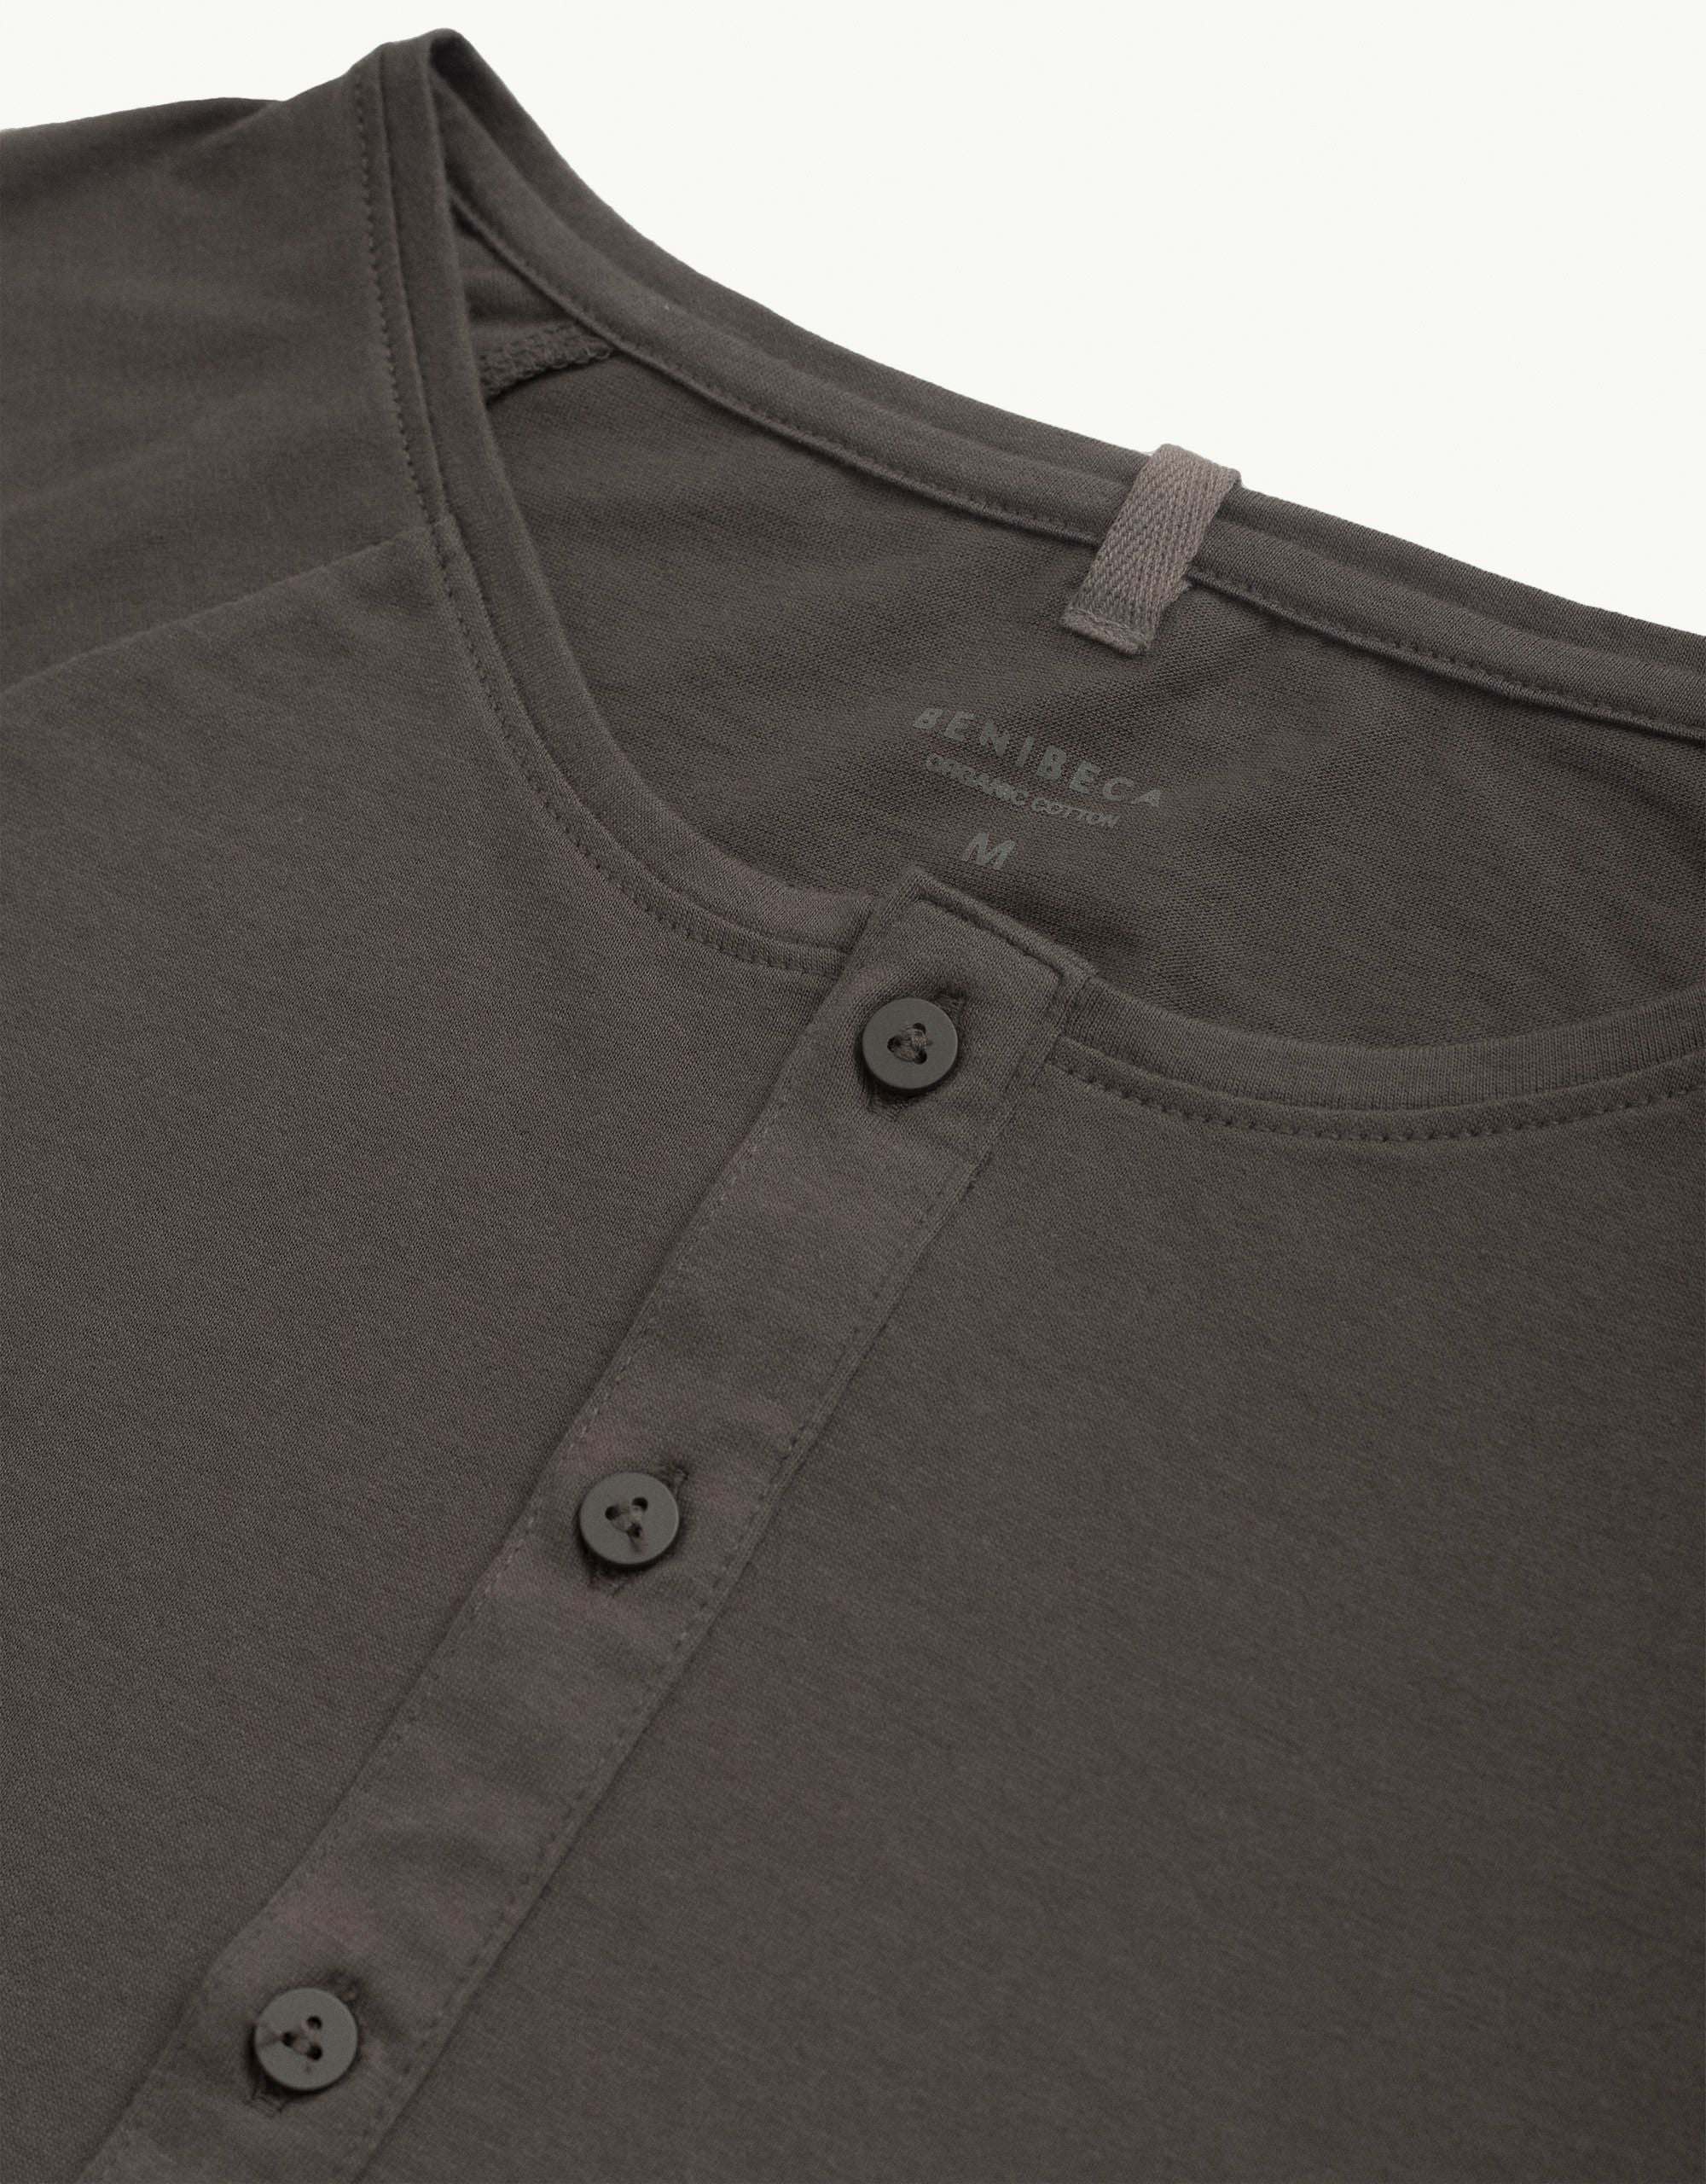 Discover sustainable fashion for men with our Abinibi T-shati. Half-sleeve polo t-shirt in grey color. Crafted for everyday luxury, our tees provide unmatched softness and all-day comfort. Stay cool in our breathable organic cotton tees for men, made from 100% organic cotton to champion sustainability and skin-friendly choices.